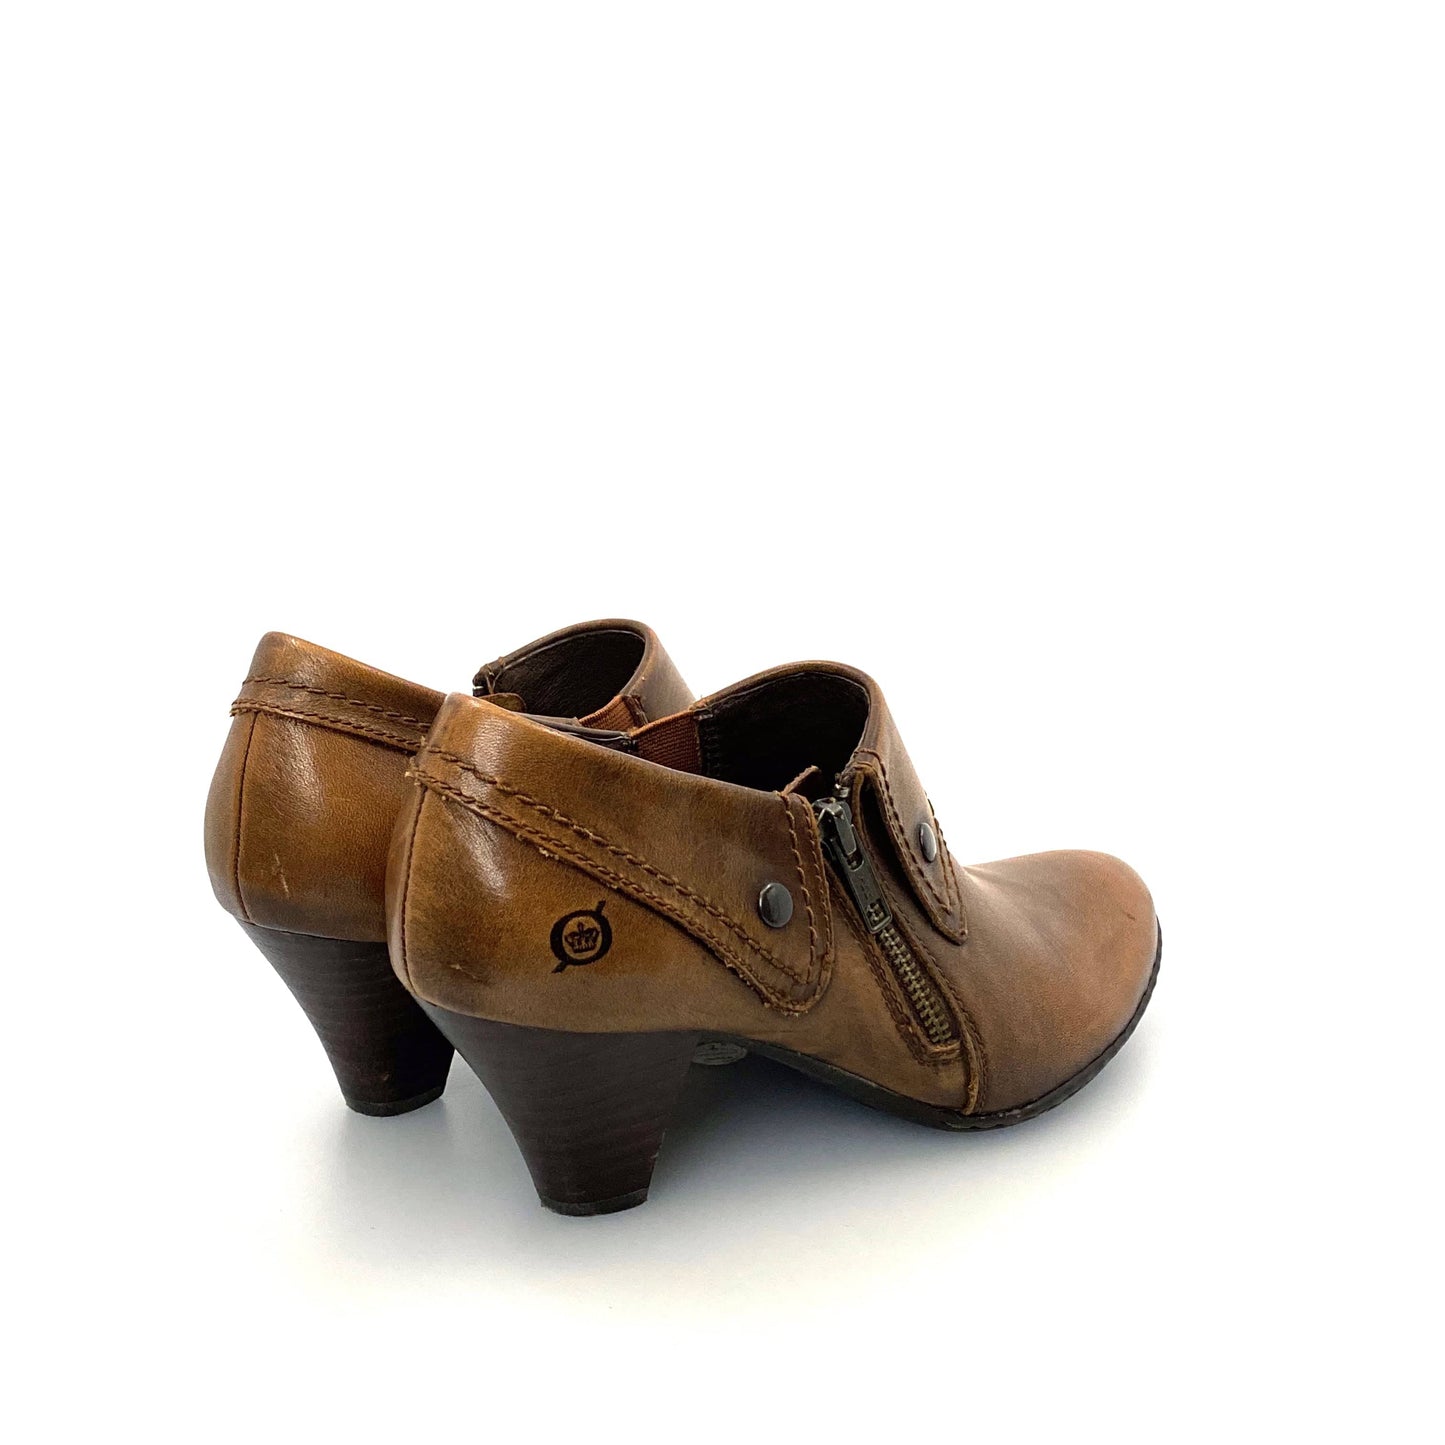 Born Womens "Tanya" Size 7.5M / 38.5 Marrone Brown Leather Ankle Booties